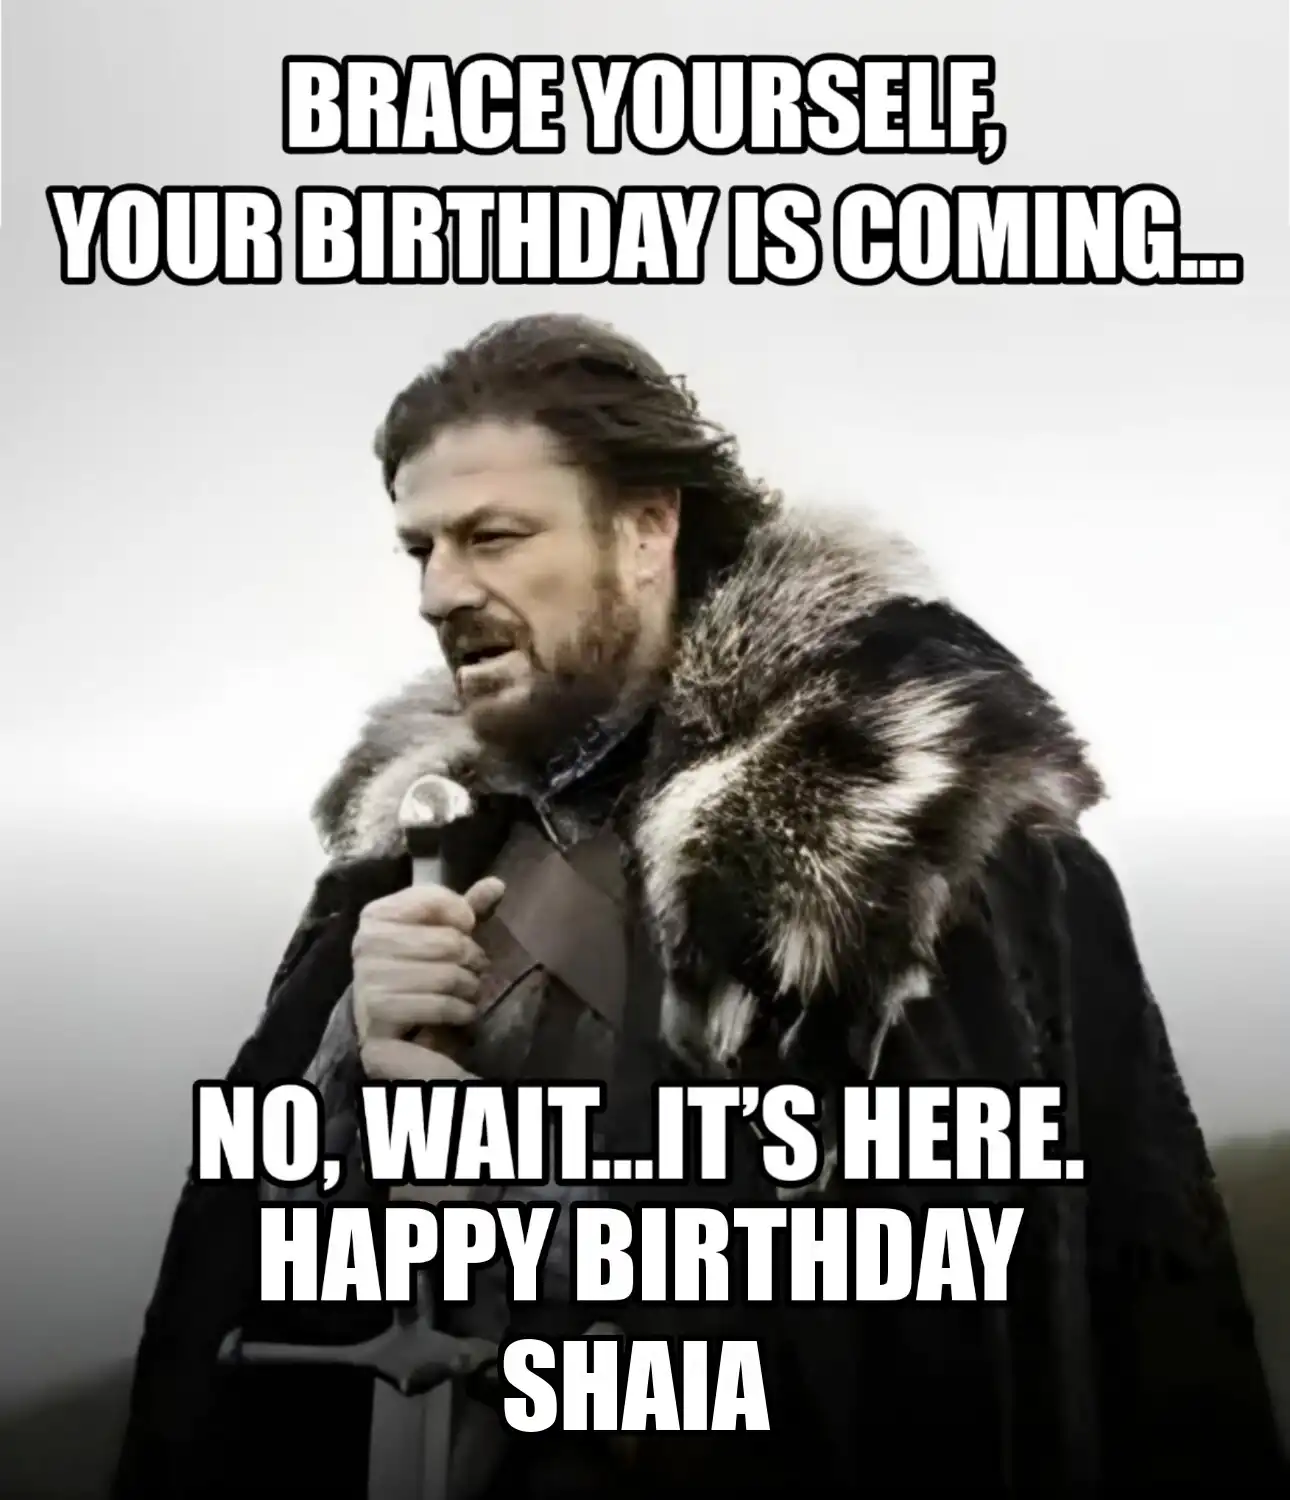 Happy Birthday Shaia Brace Yourself Your Birthday Is Coming Meme